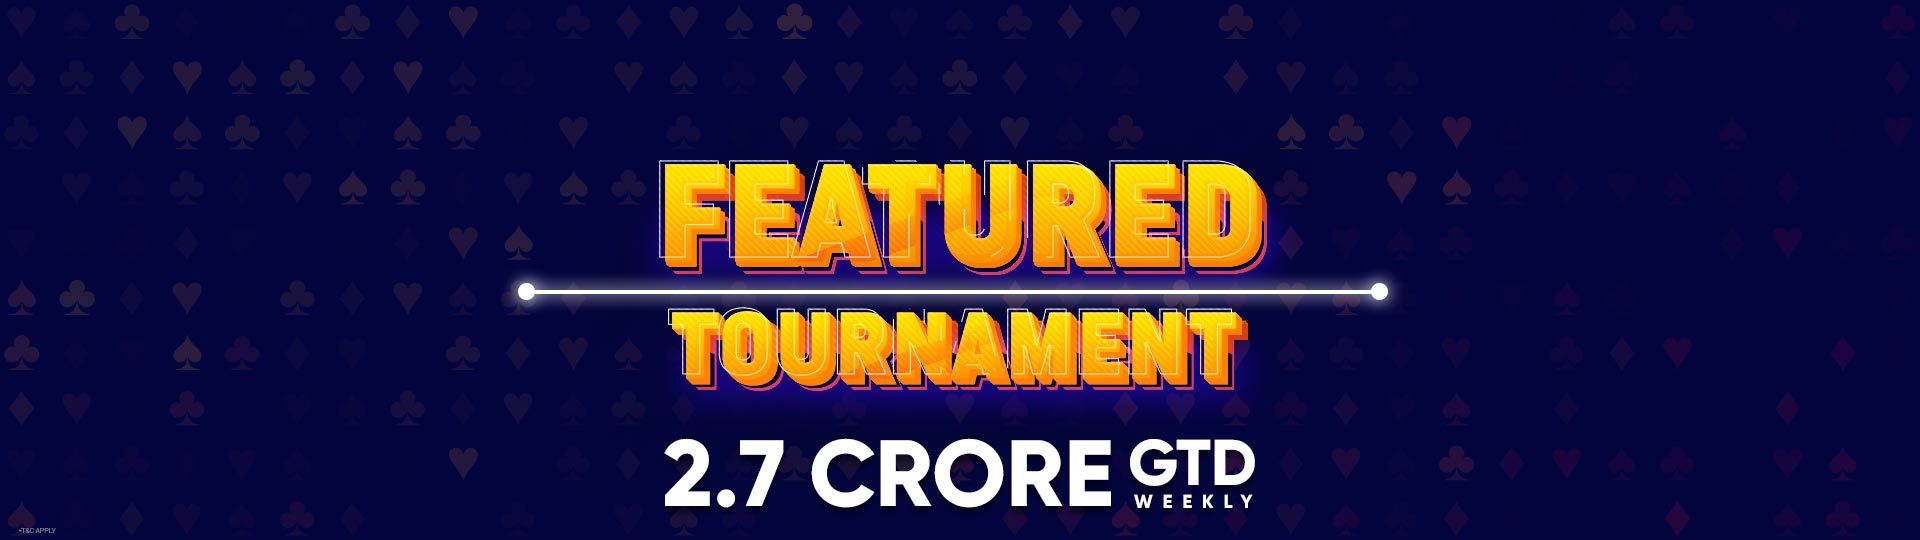 Play Featured Tournaments & Win Rs 2 Crore Weekly